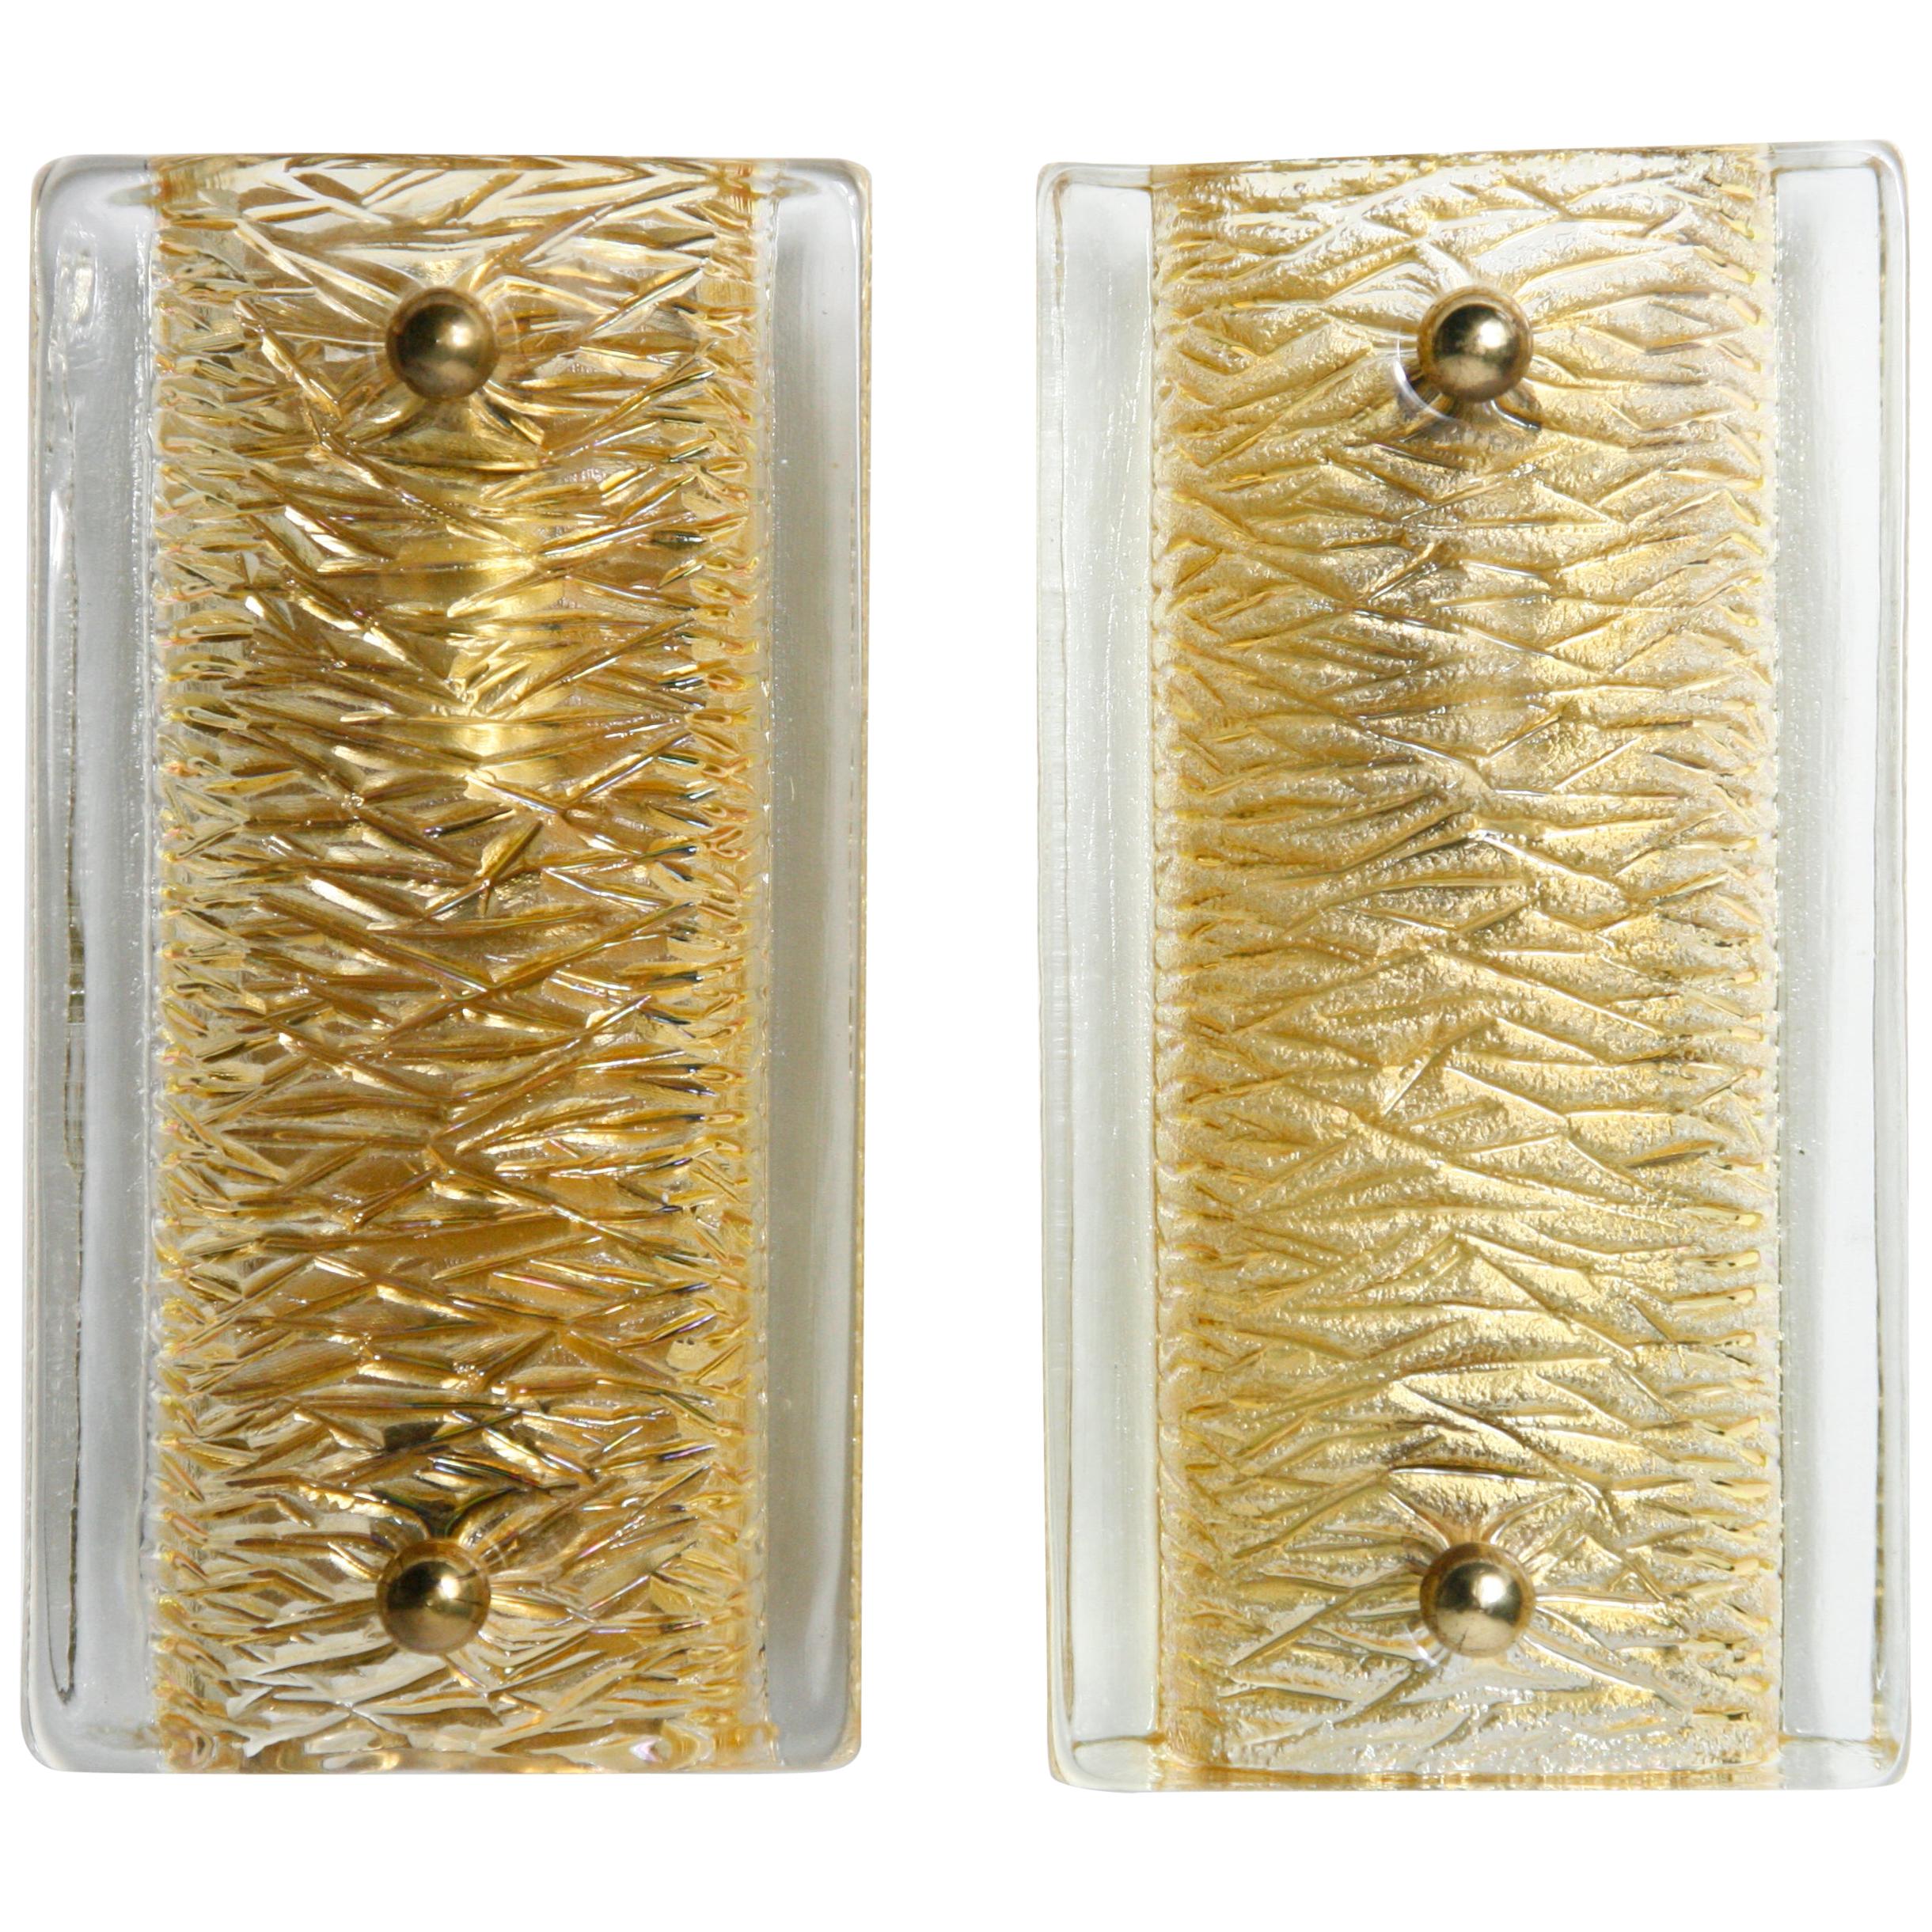 Pair of Orrefors Sconces Brass and Crystal Glass Shades by Orrefors Sweden, 1970